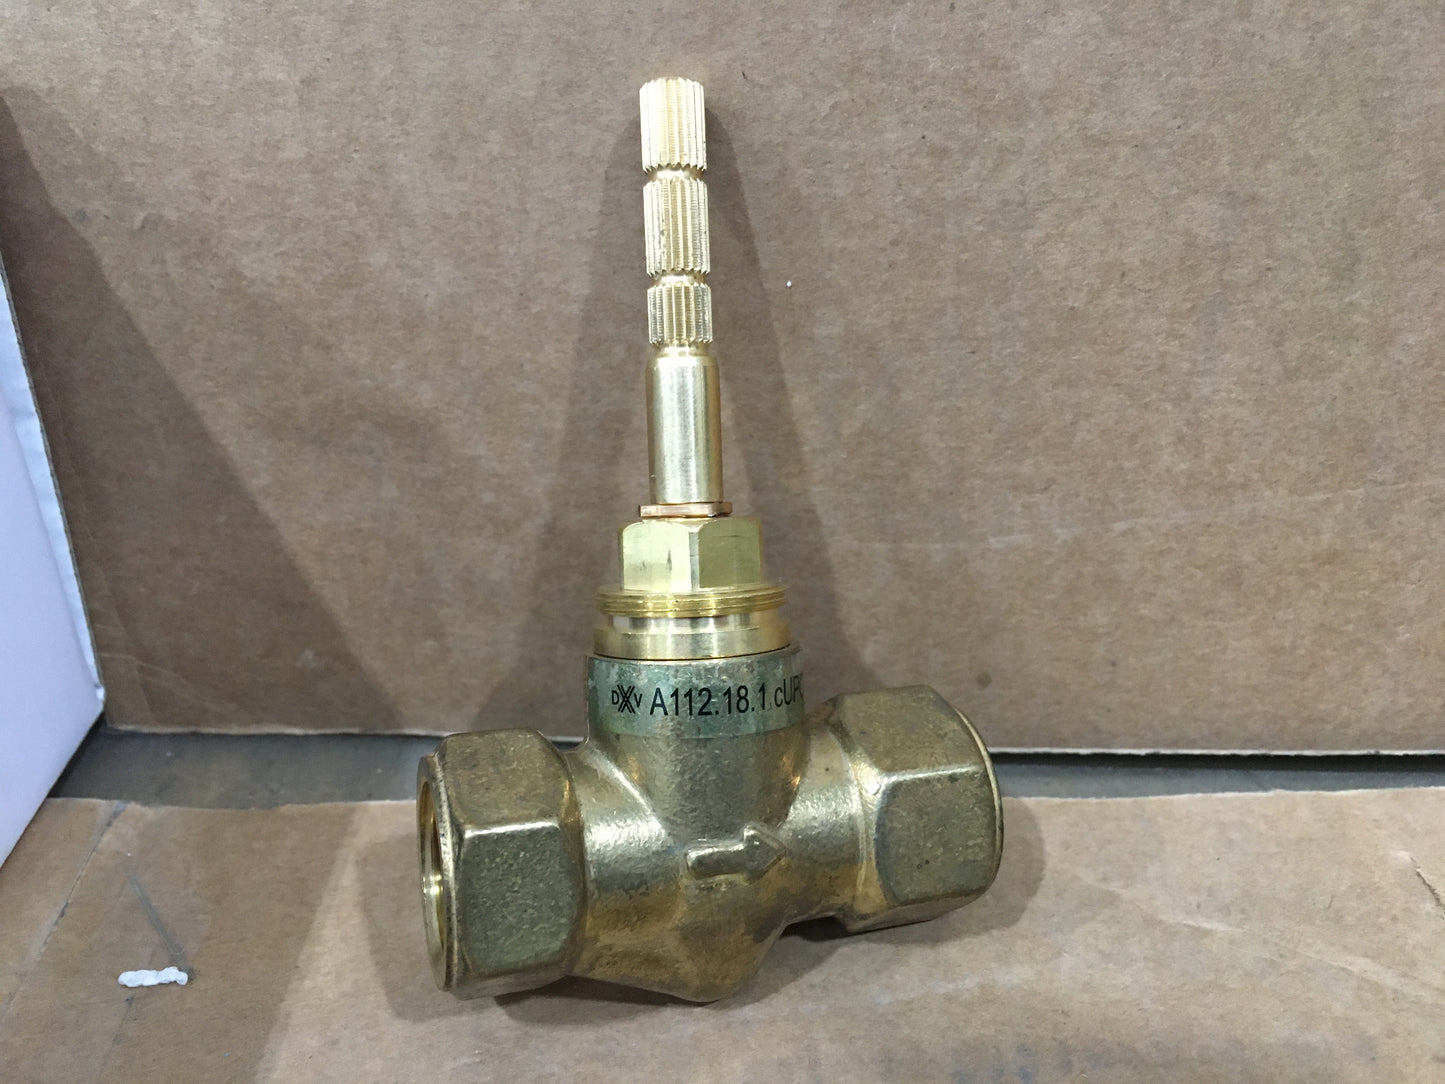 1/2" NPT WALL VALVE ROUGH ONLY